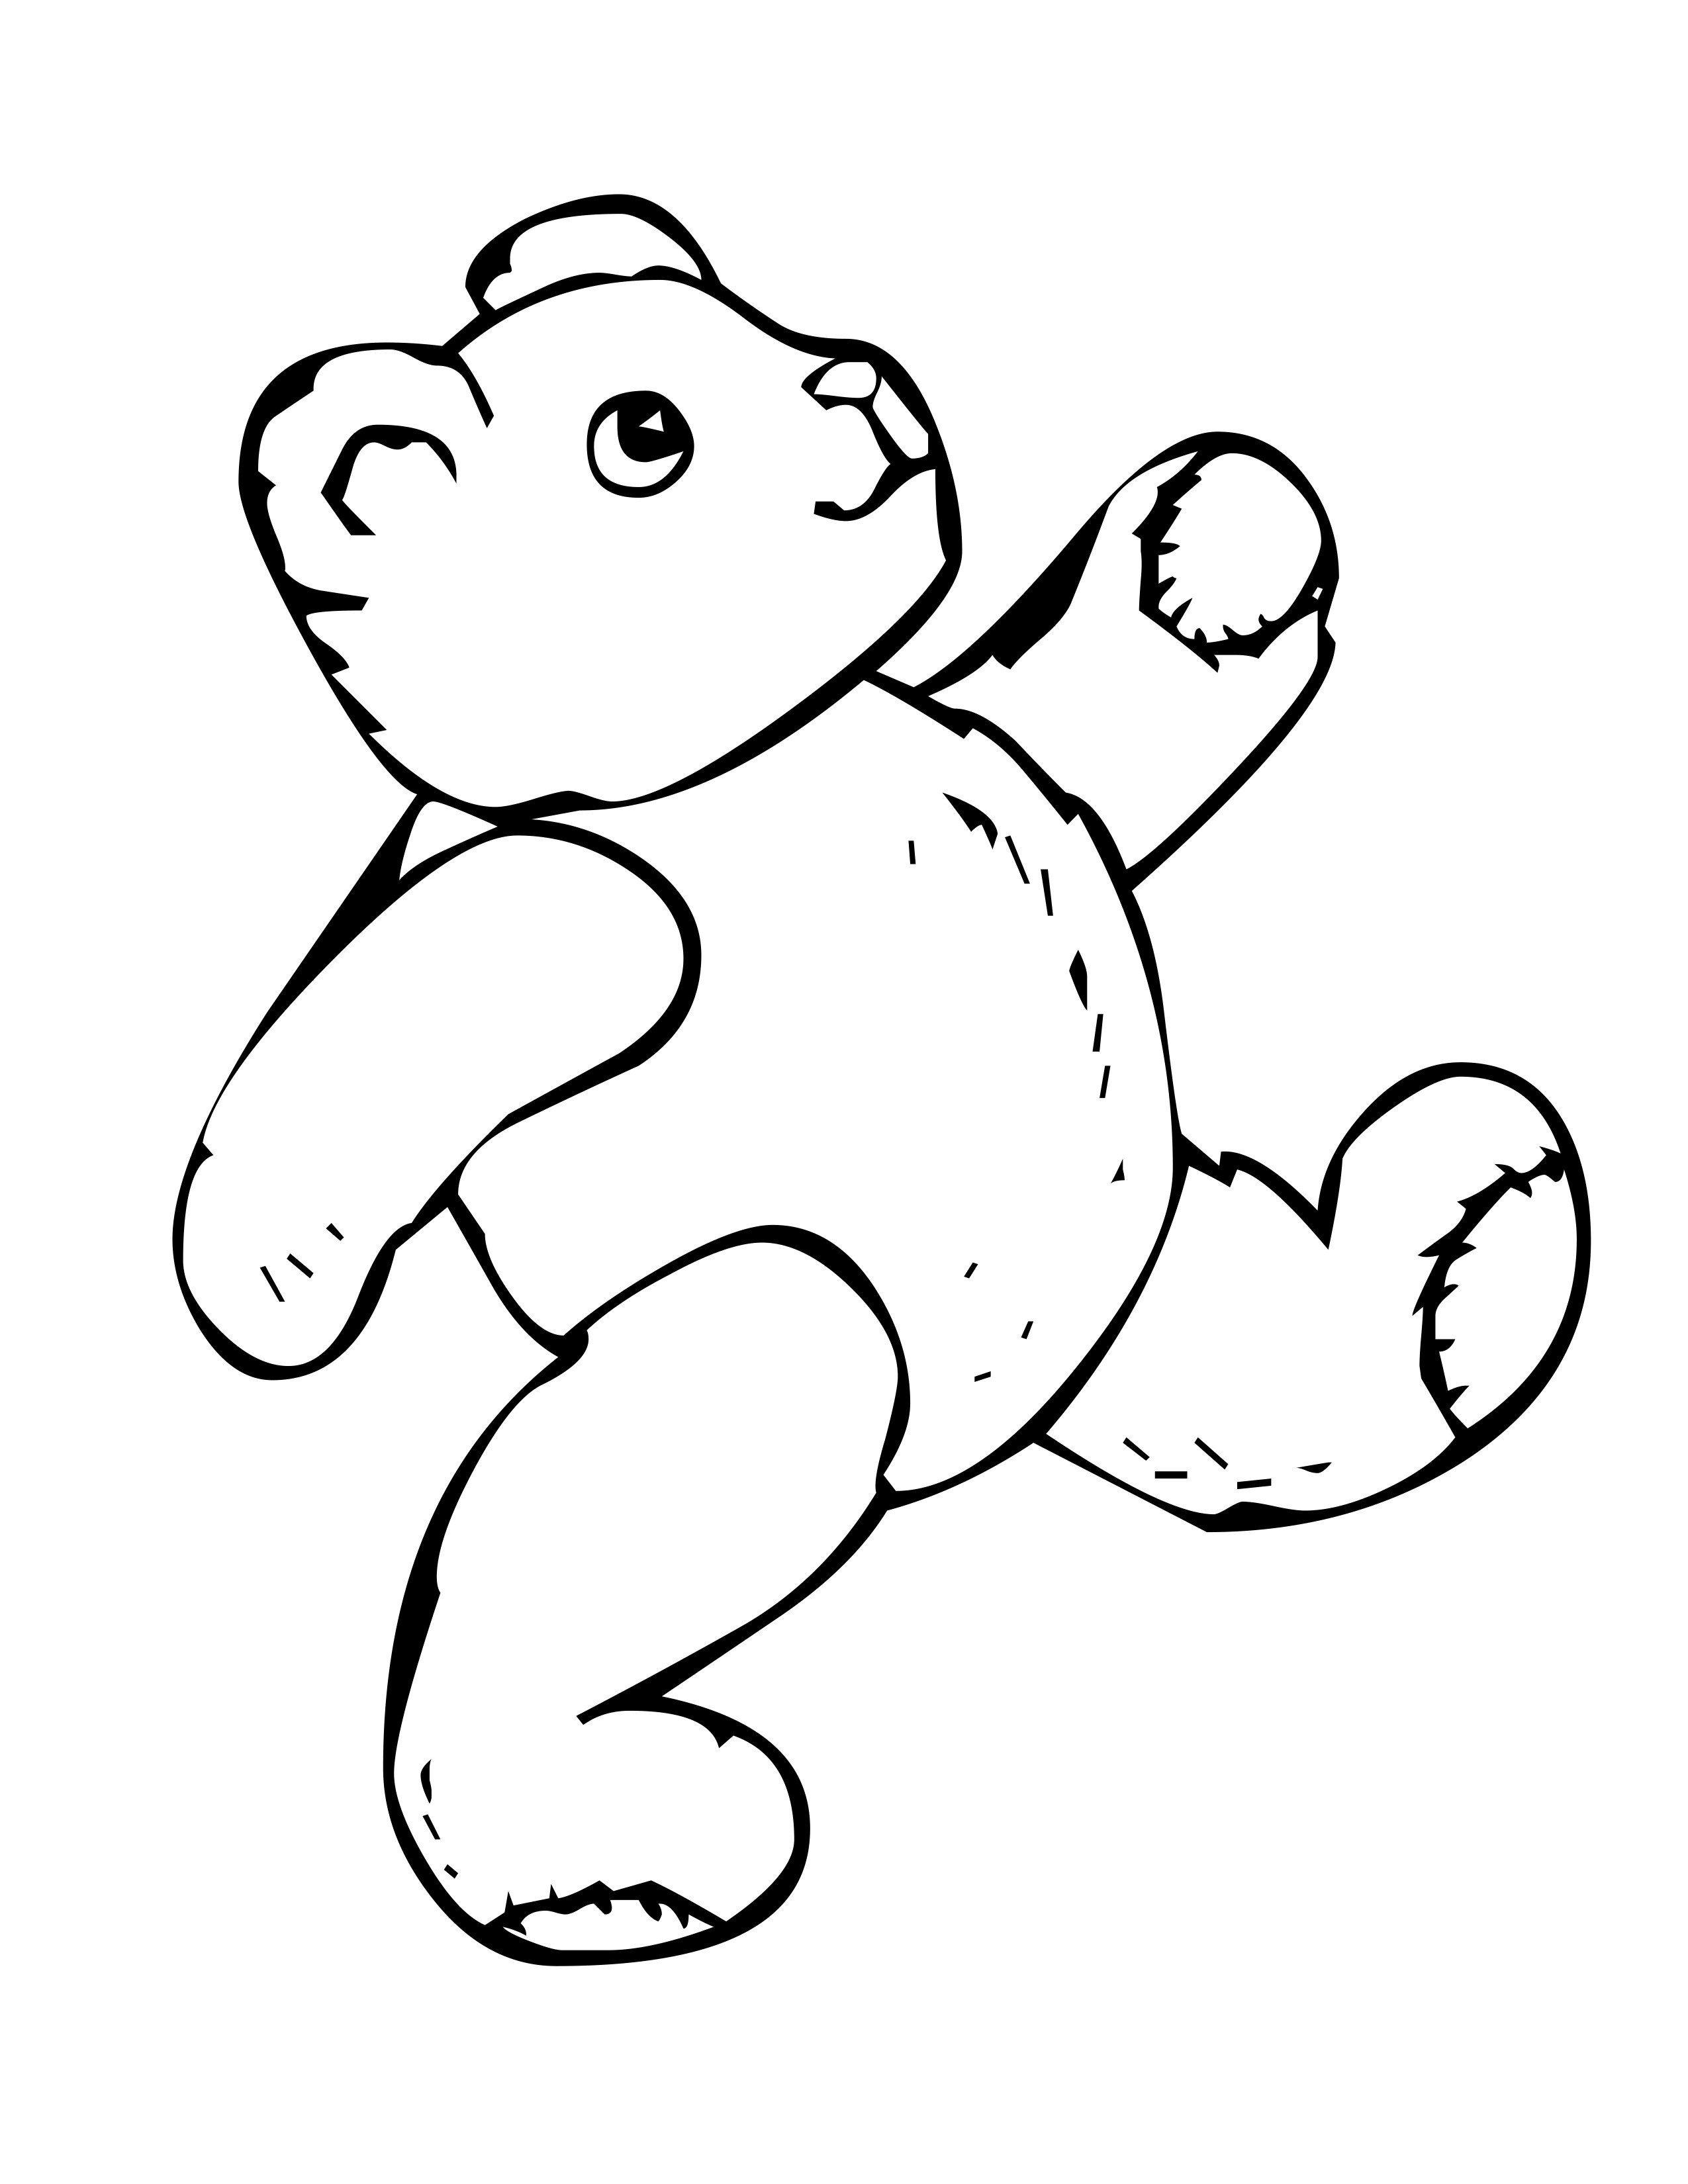 Awesome Bear Coloring Page About Teddy Bear Coloring Pages on with